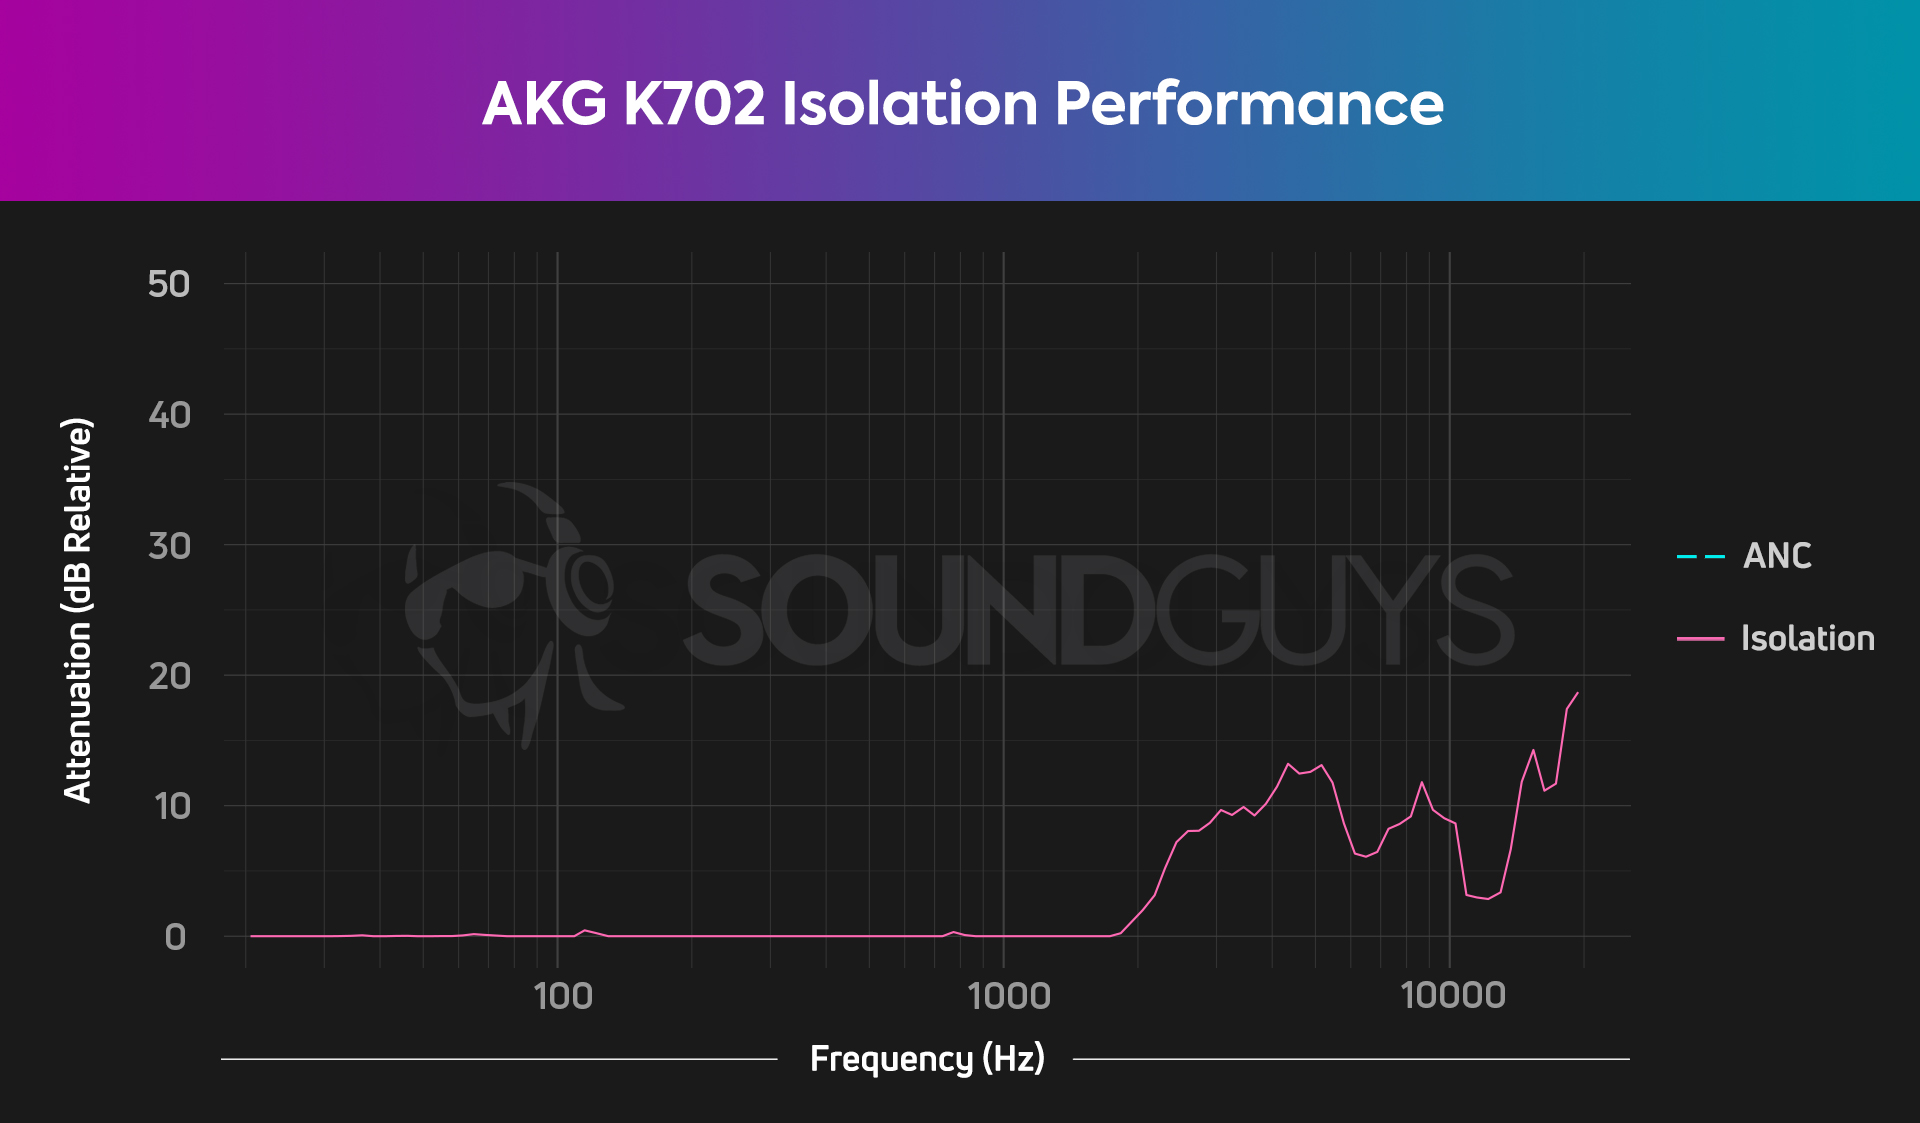 Chart shows the very small amount of isolation the AKG K702 performs.